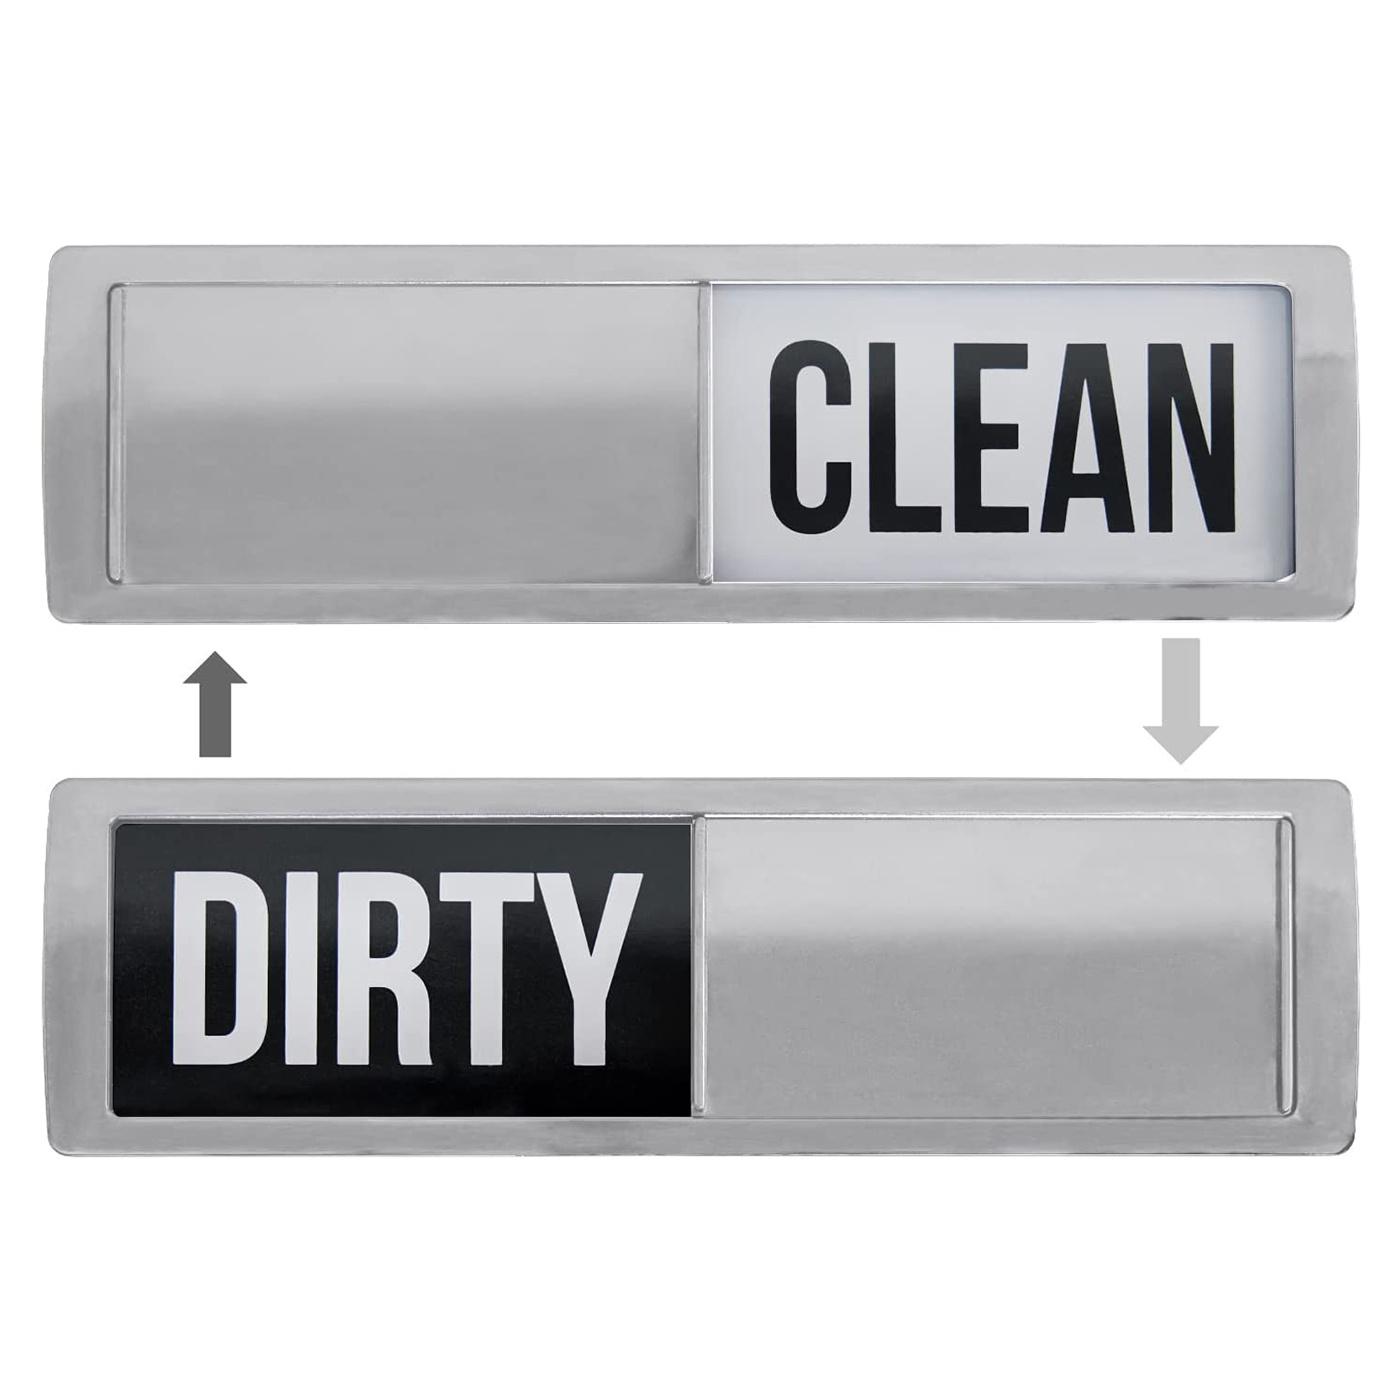 Dirty Clean Dishwasher Magnet Rectangle Magnet Dirty / Clean Dishwasher  Rectangle Magnet